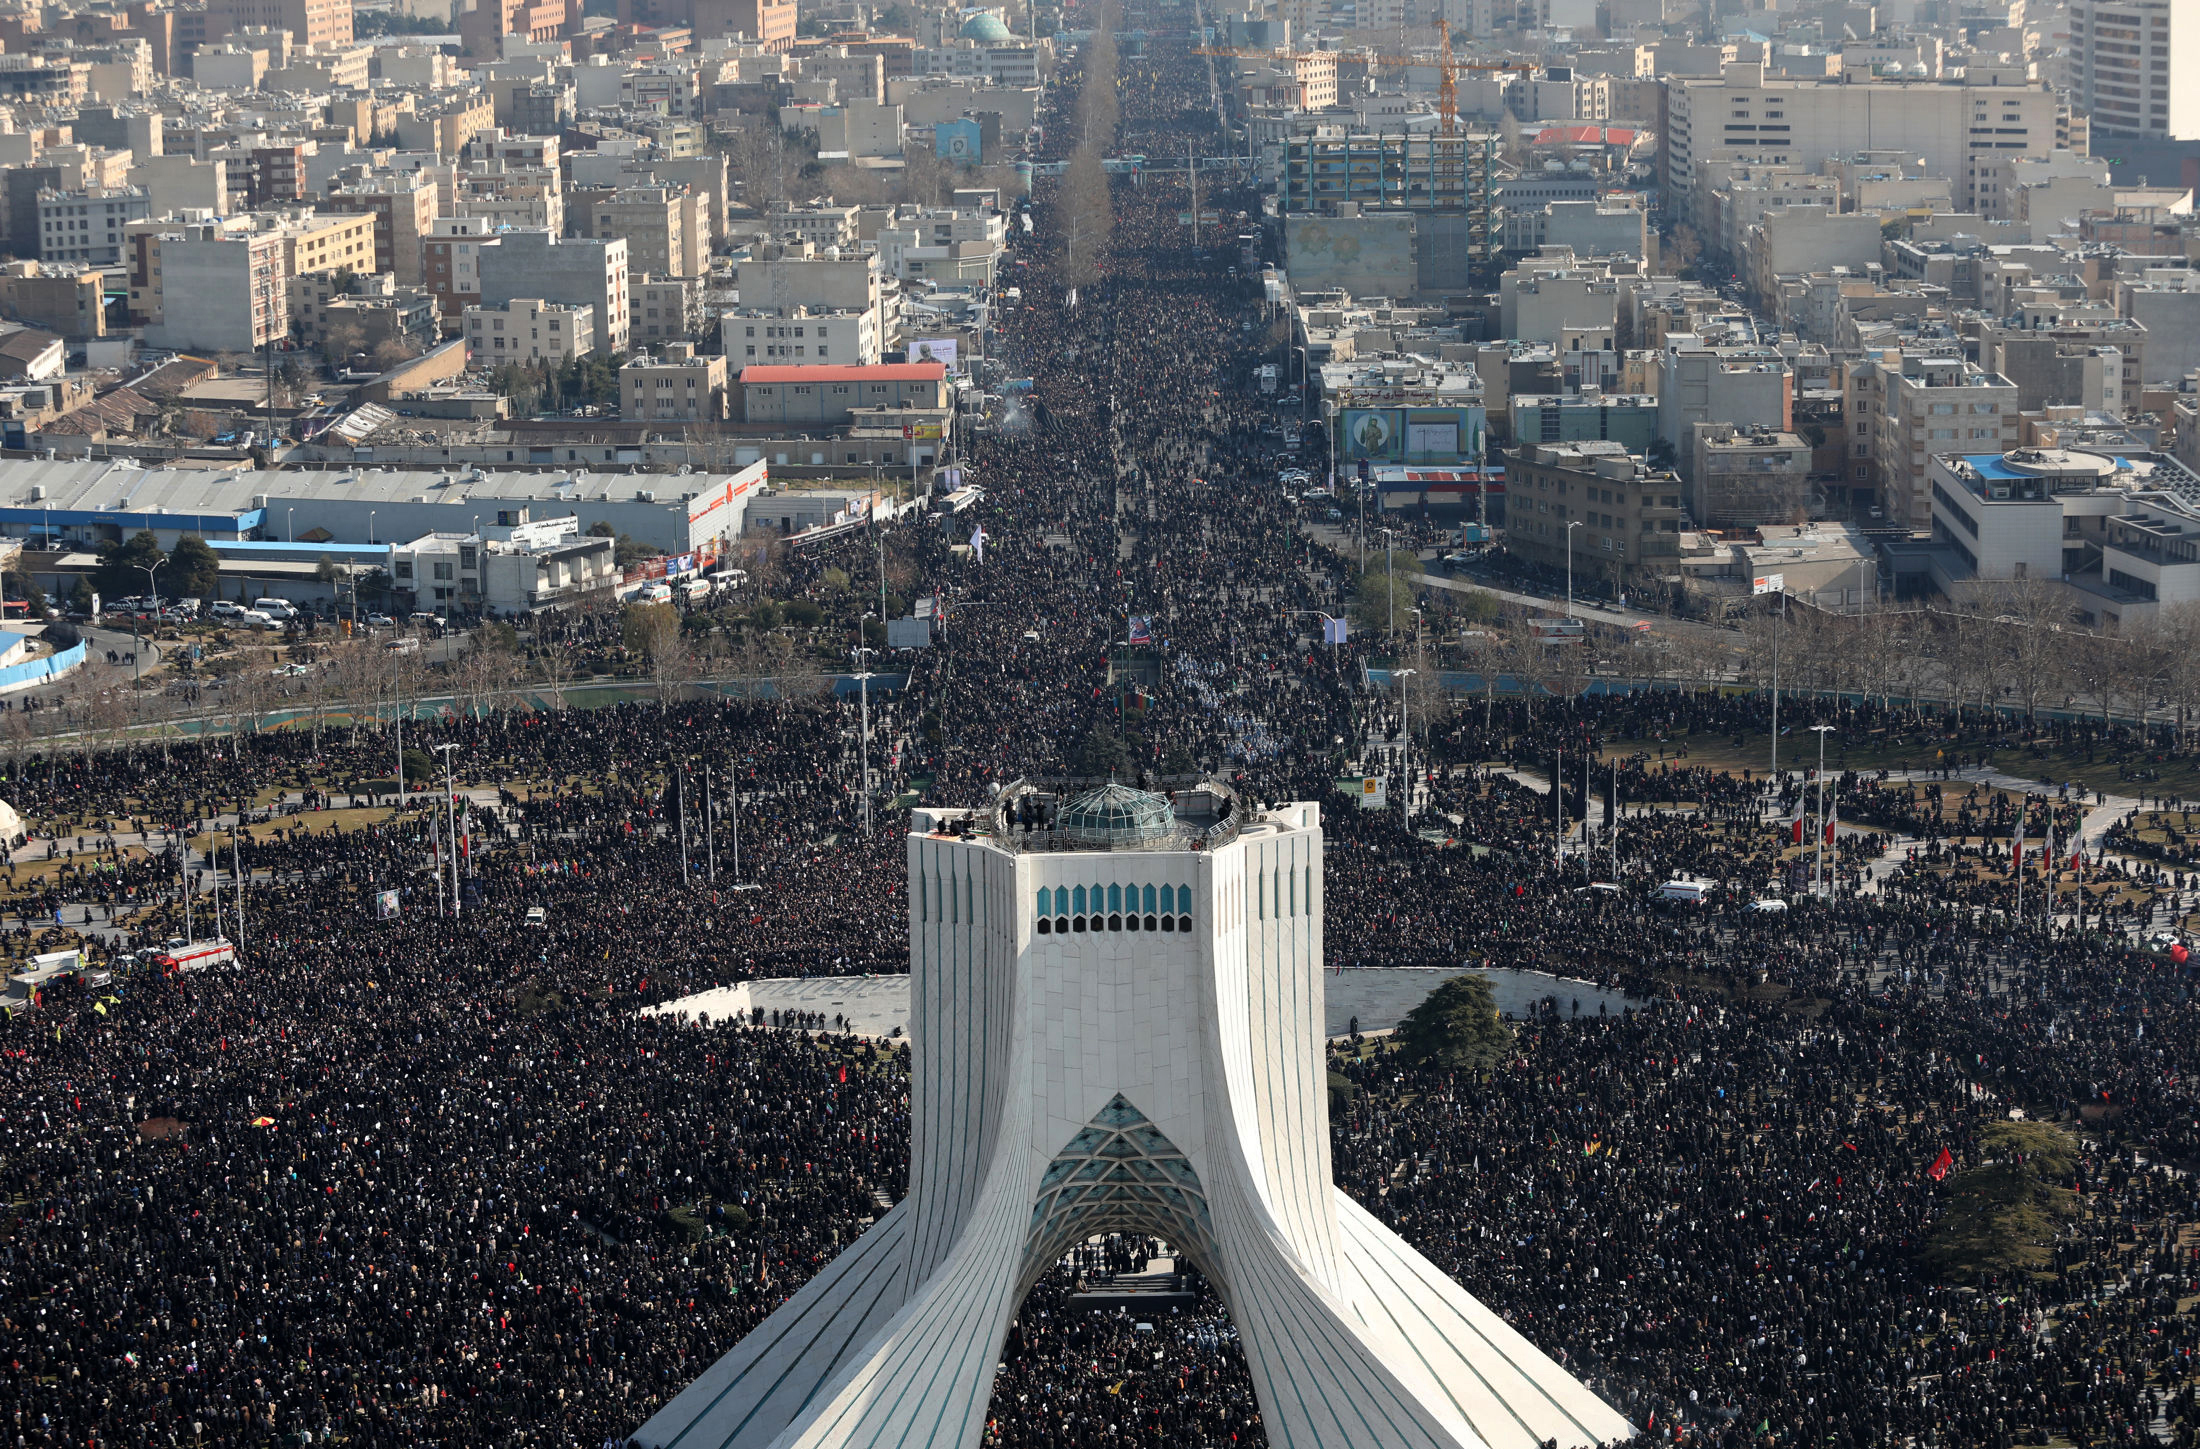 In this photo released by the official website of the Office of the Iranian Supreme Leader, mourners attend a funeral ceremony for Iranian Gen. Qassem Soleimani and his comrades, who were killed in Iraq in a U.S. drone attack on Friday, Jan. 3 as Azadi (freedom) tower is seen in the foreground, in Tehran, Iran, Monday, Jan. 6, 2020. The funeral for Soleimani drew a crowd said by police to be in the millions in the Iranian capital, filling thoroughfares and side streets as far as the eye could see. (Office of the Iranian Supreme Leader via AP)